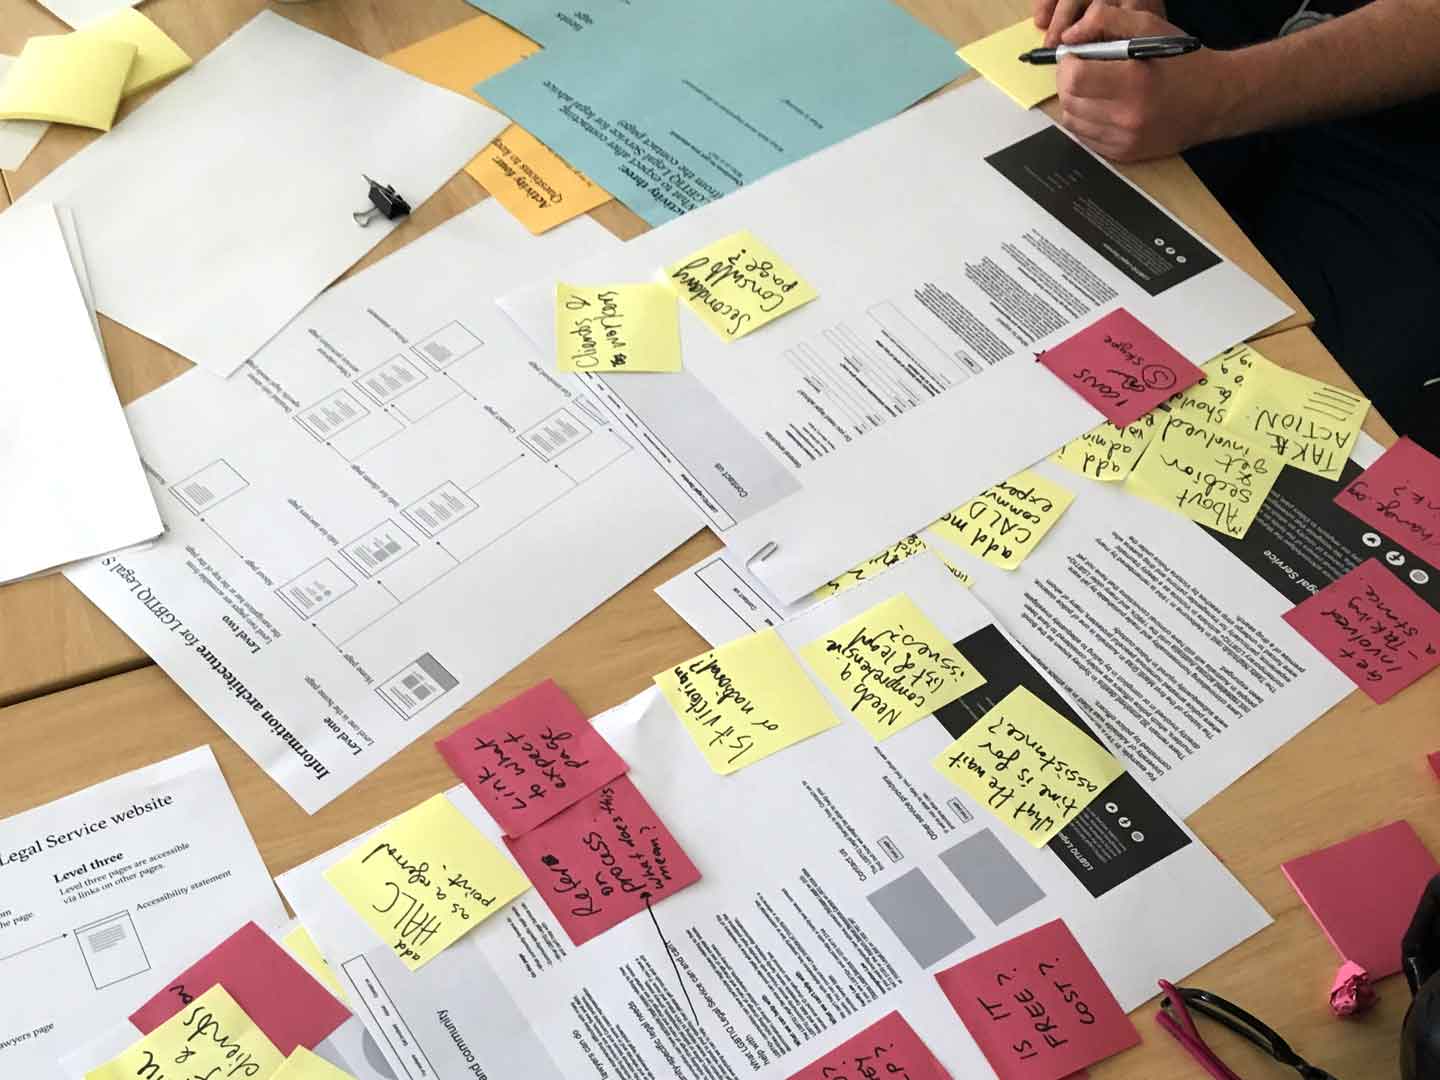 An overhead shot of a table. There are wireframes and page templates printed and spread across the table. A person is writing feedback on post-it notes and annotating the wireframes. 